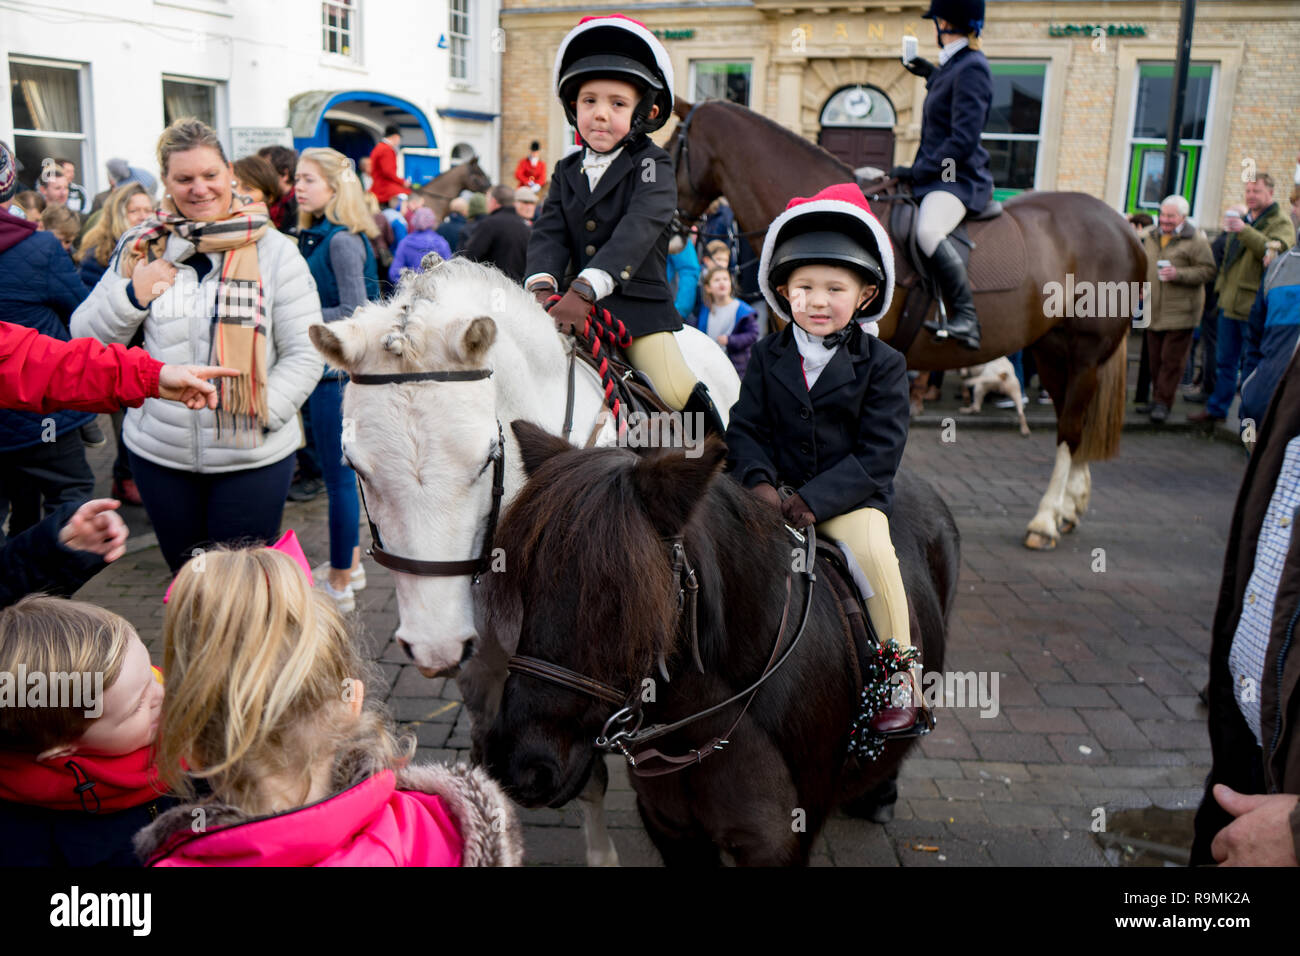 Leominster, Herefordshire, UK. 26th Dec, 2018. Henry Graham (left) and Leonard Graham (right) the two youngest on horseback are seen in Corn Square with members of the North Herefordshire Hunt as part of the annual Christmas tradition of the Boxing Day Hunt meet in Leominster on December 26, 2018. Credit: Jim Wood/Alamy Live News Stock Photo